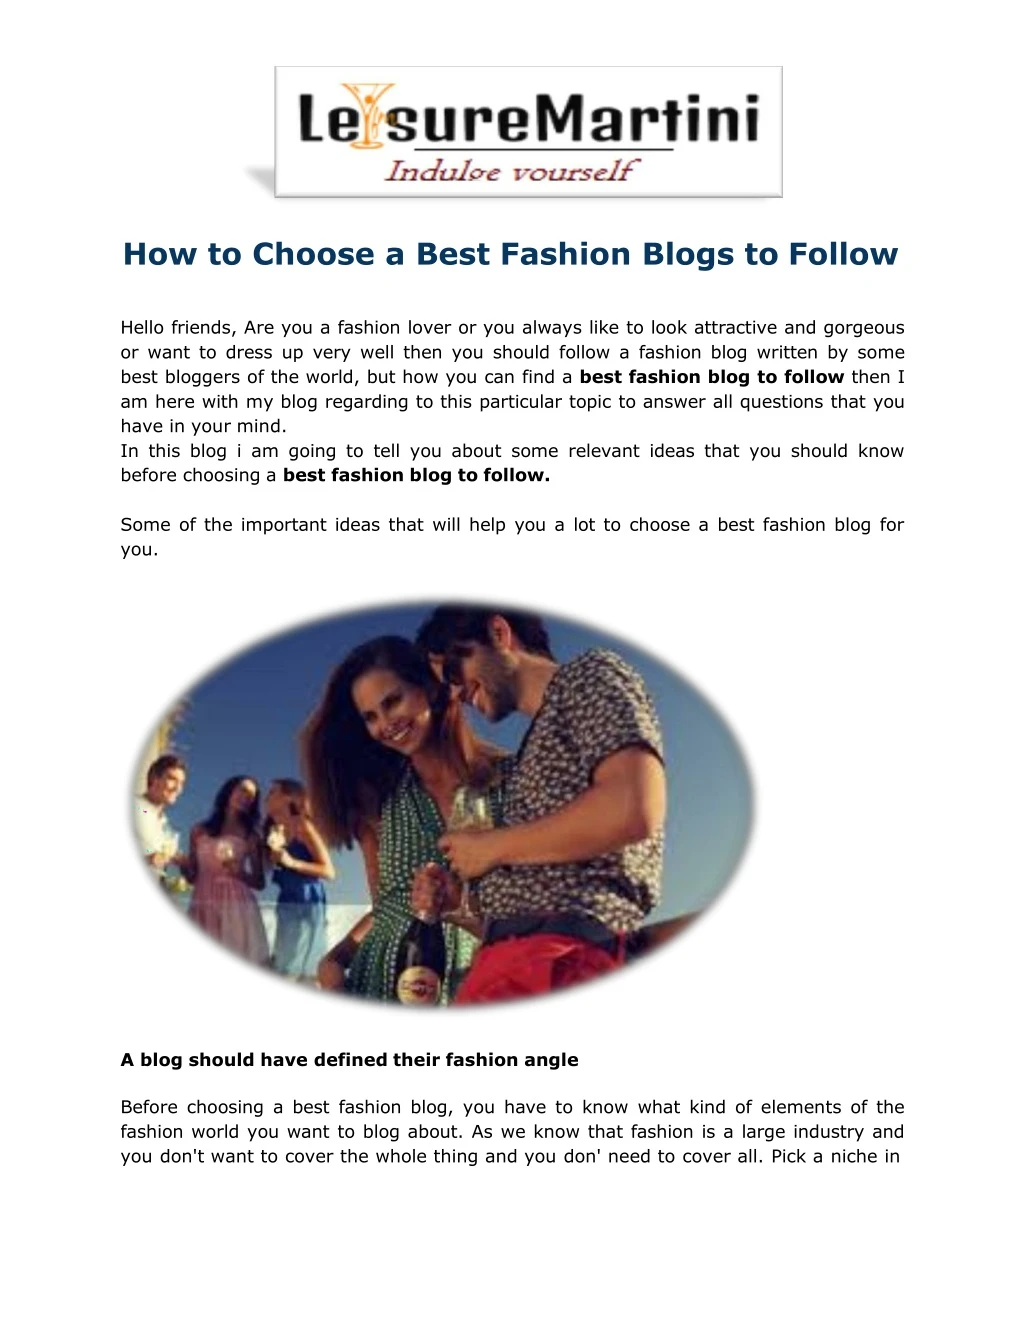 how to choose a best fashion blogs to follow